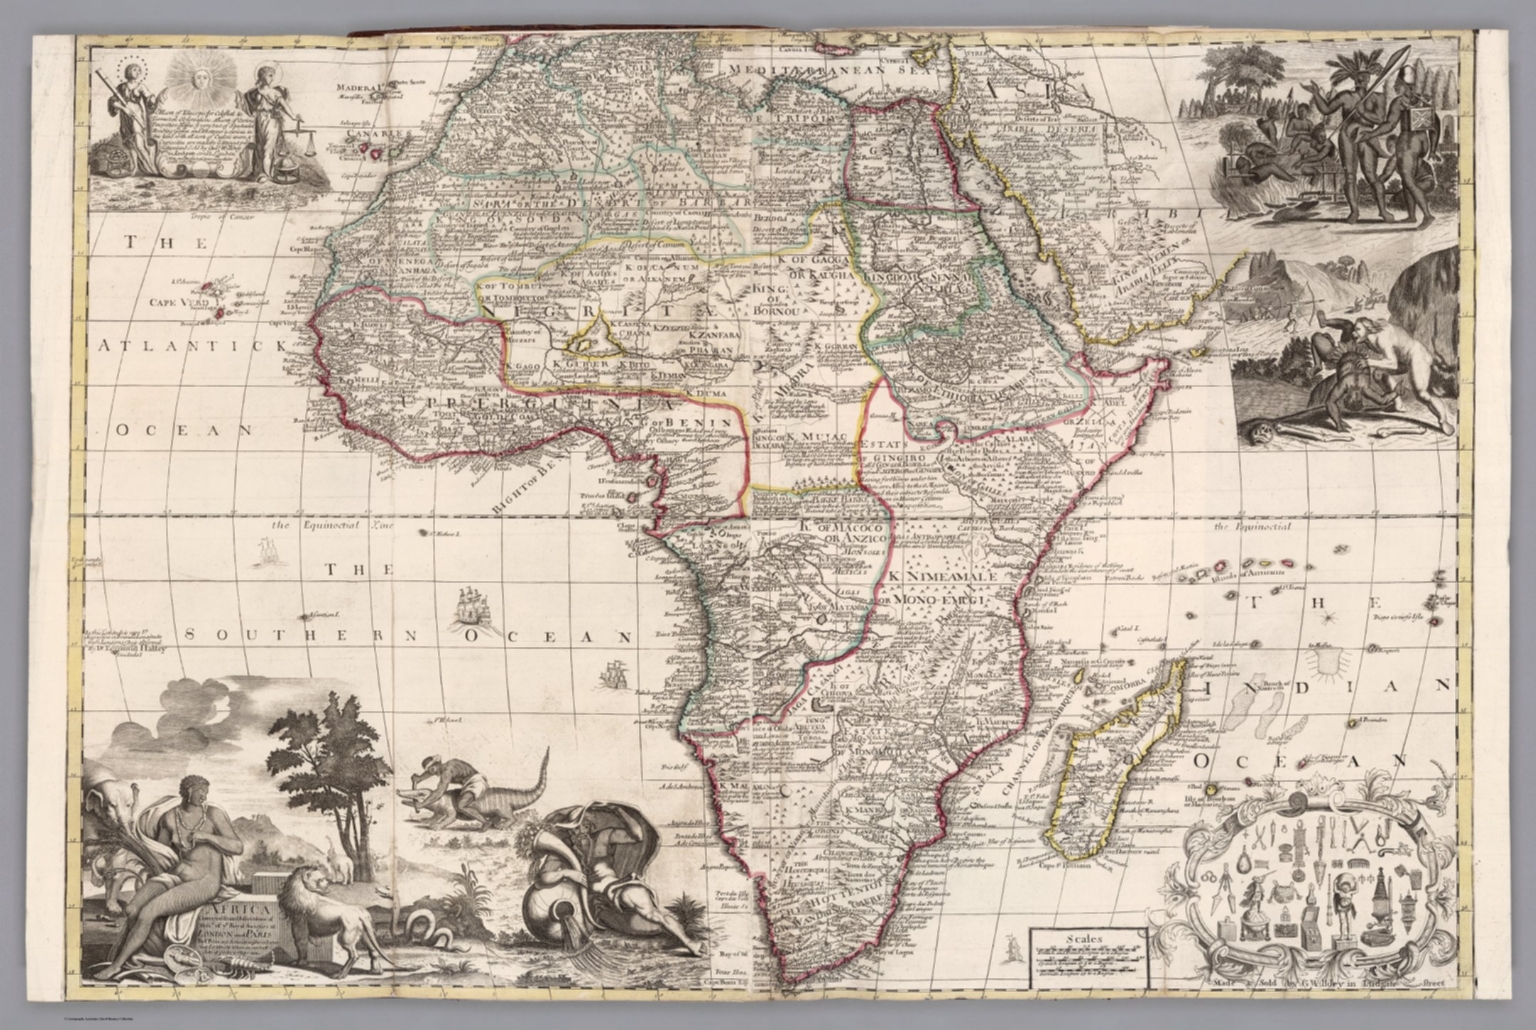 No Africa David Rumsey Historical Map Collection